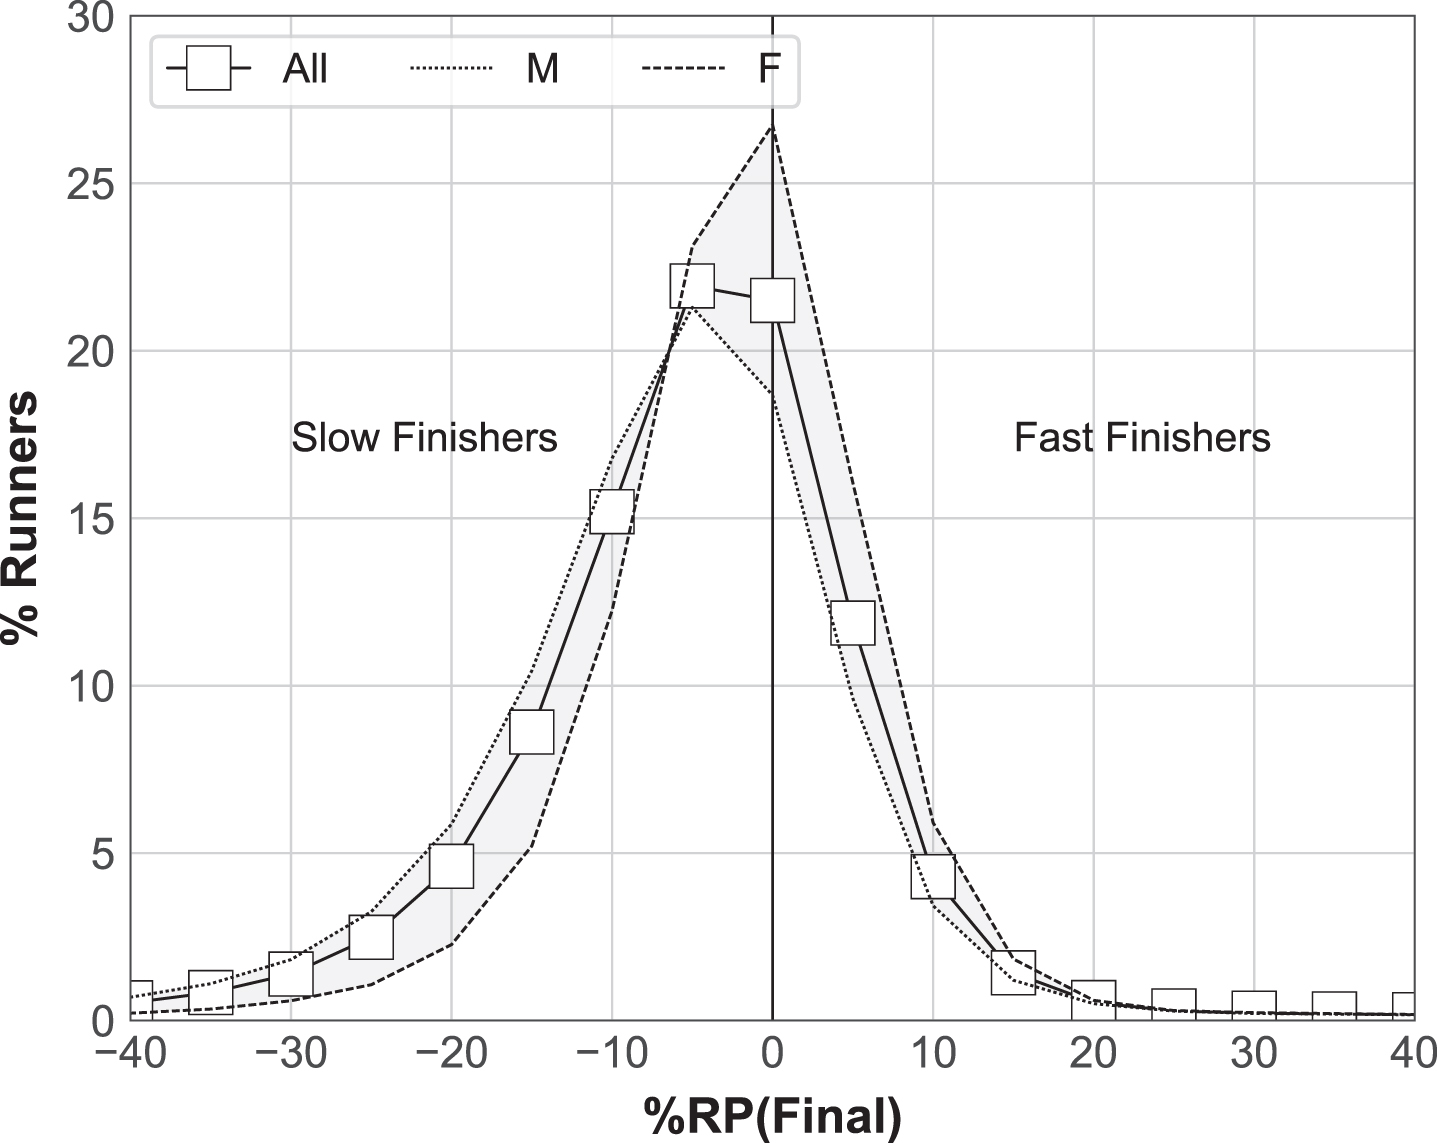 The mean percentage of runners (all, male, female) with given final paces.